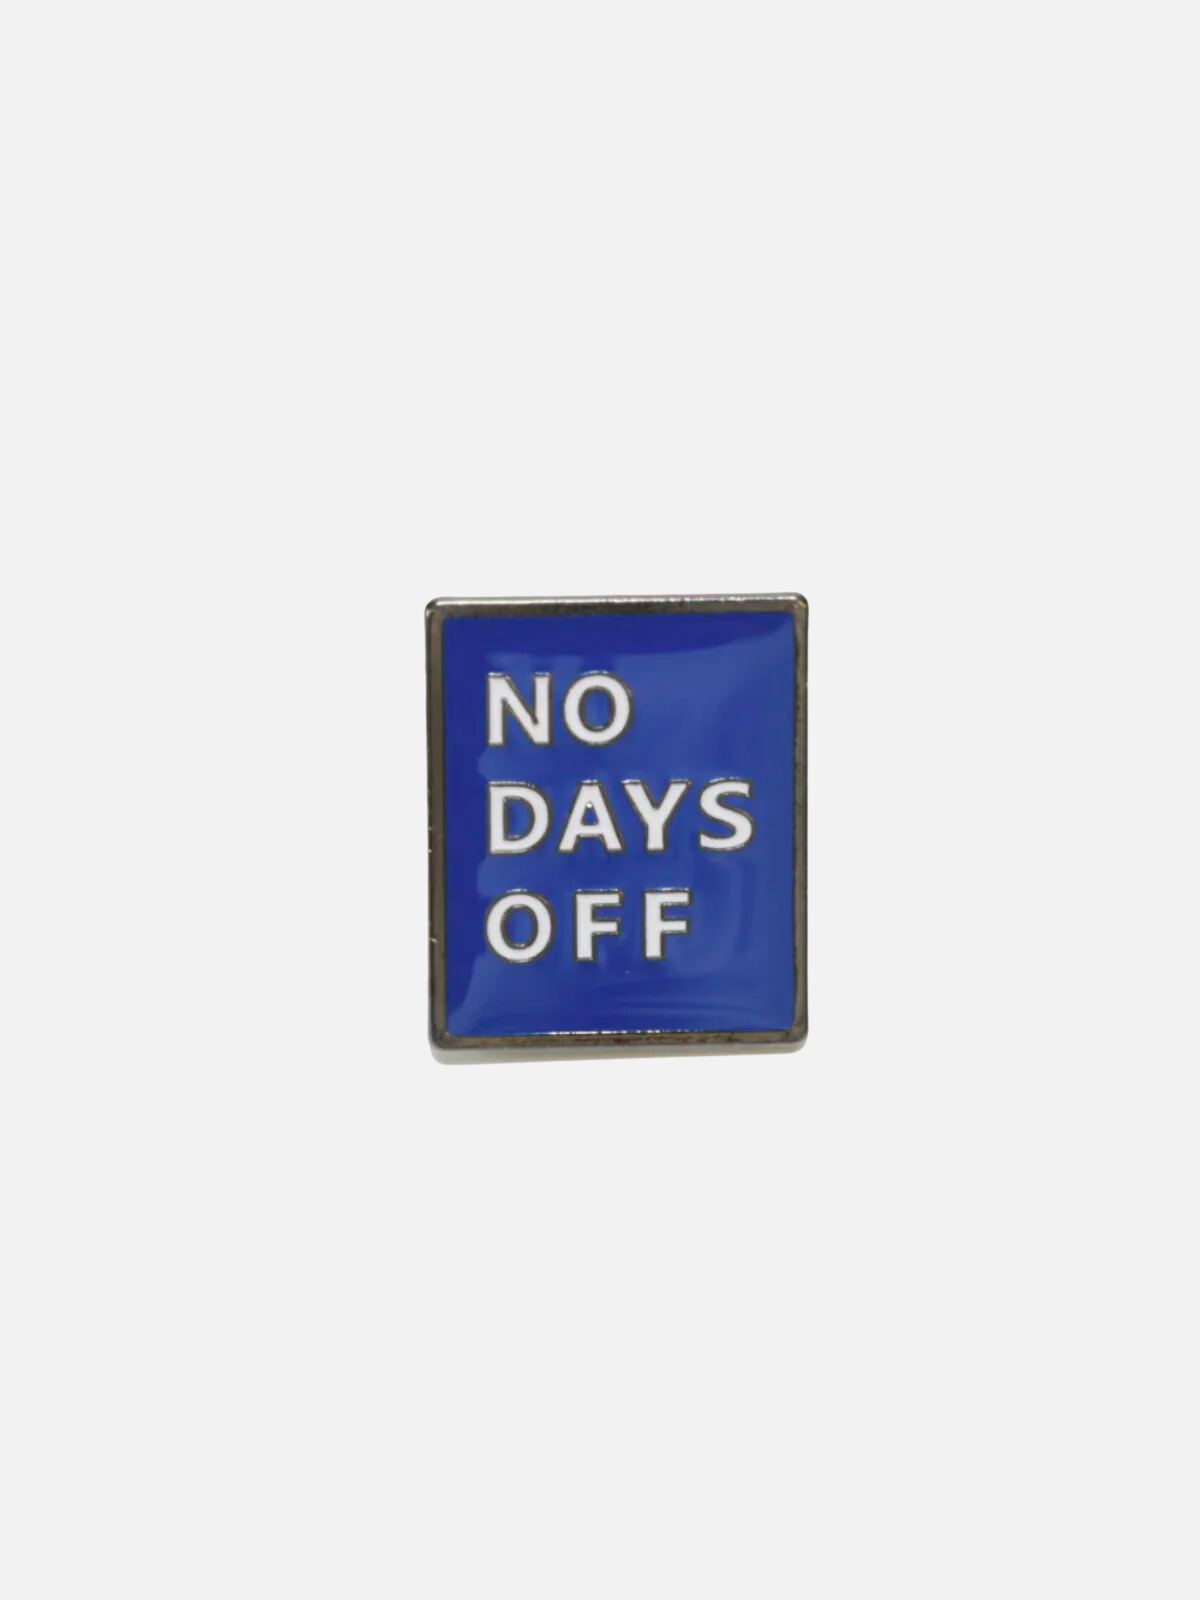 curated basics no days off pin kempt athens ga georgia men's clothing jewelry store